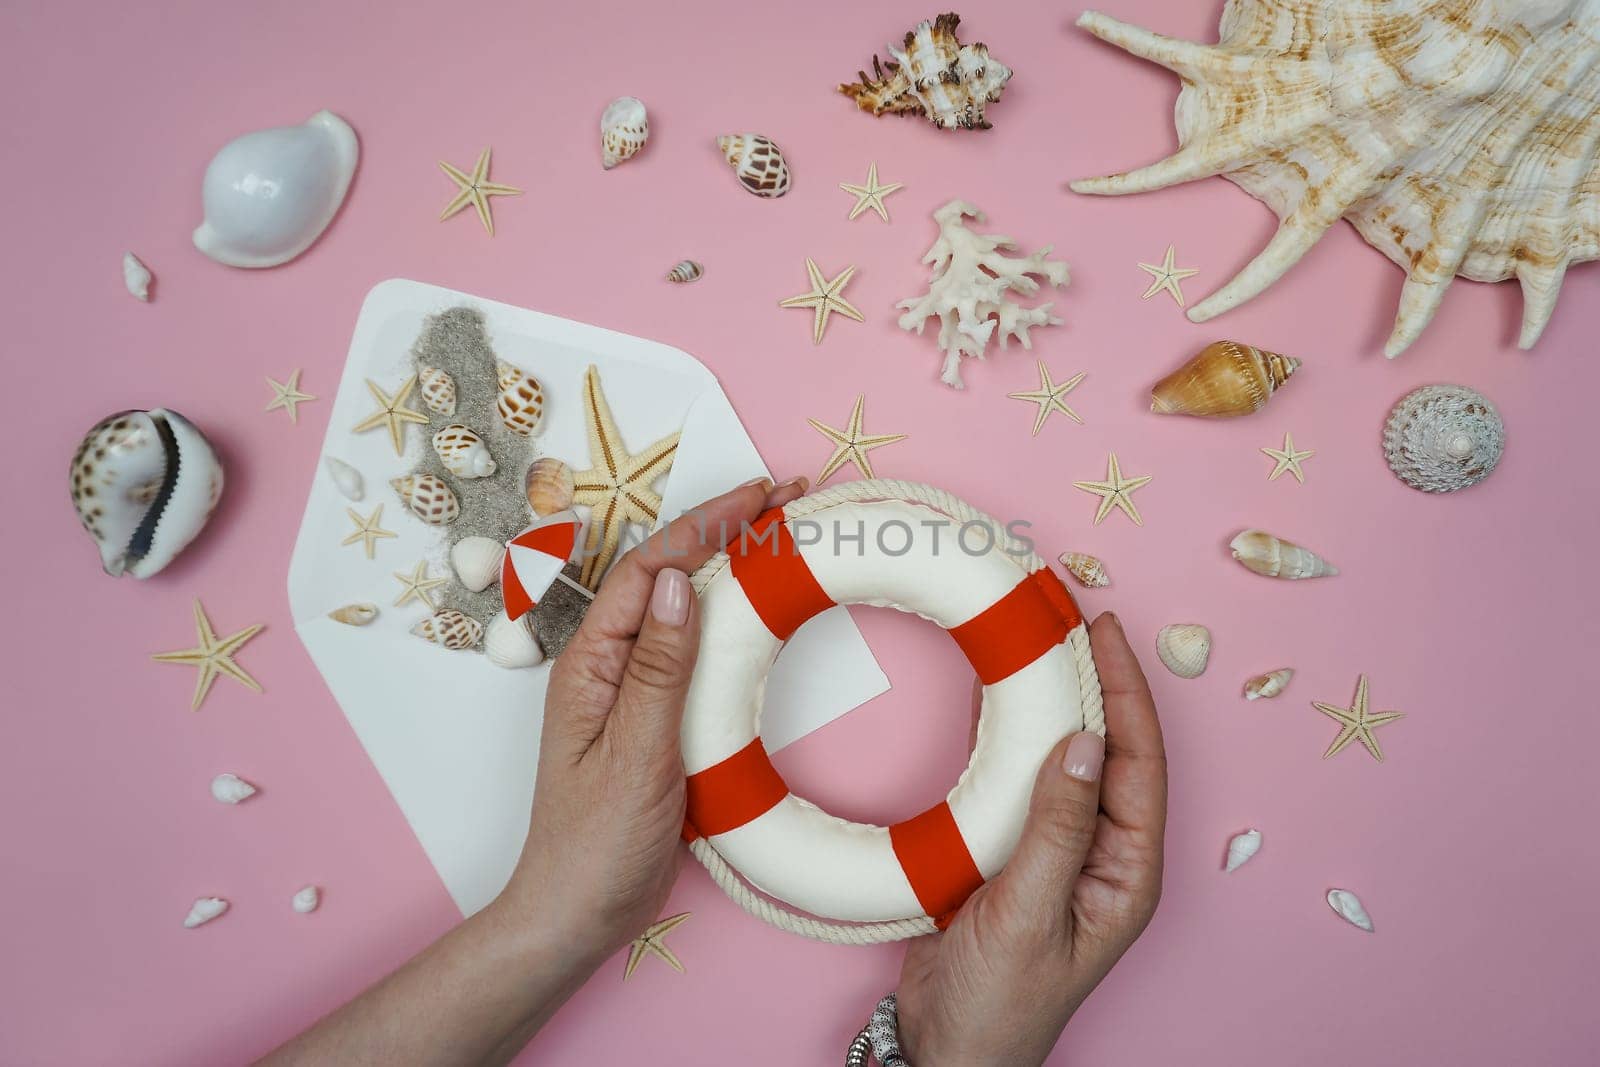 A lifebuoy in women's hands on a pink background with shells, starfish and memories of summer.